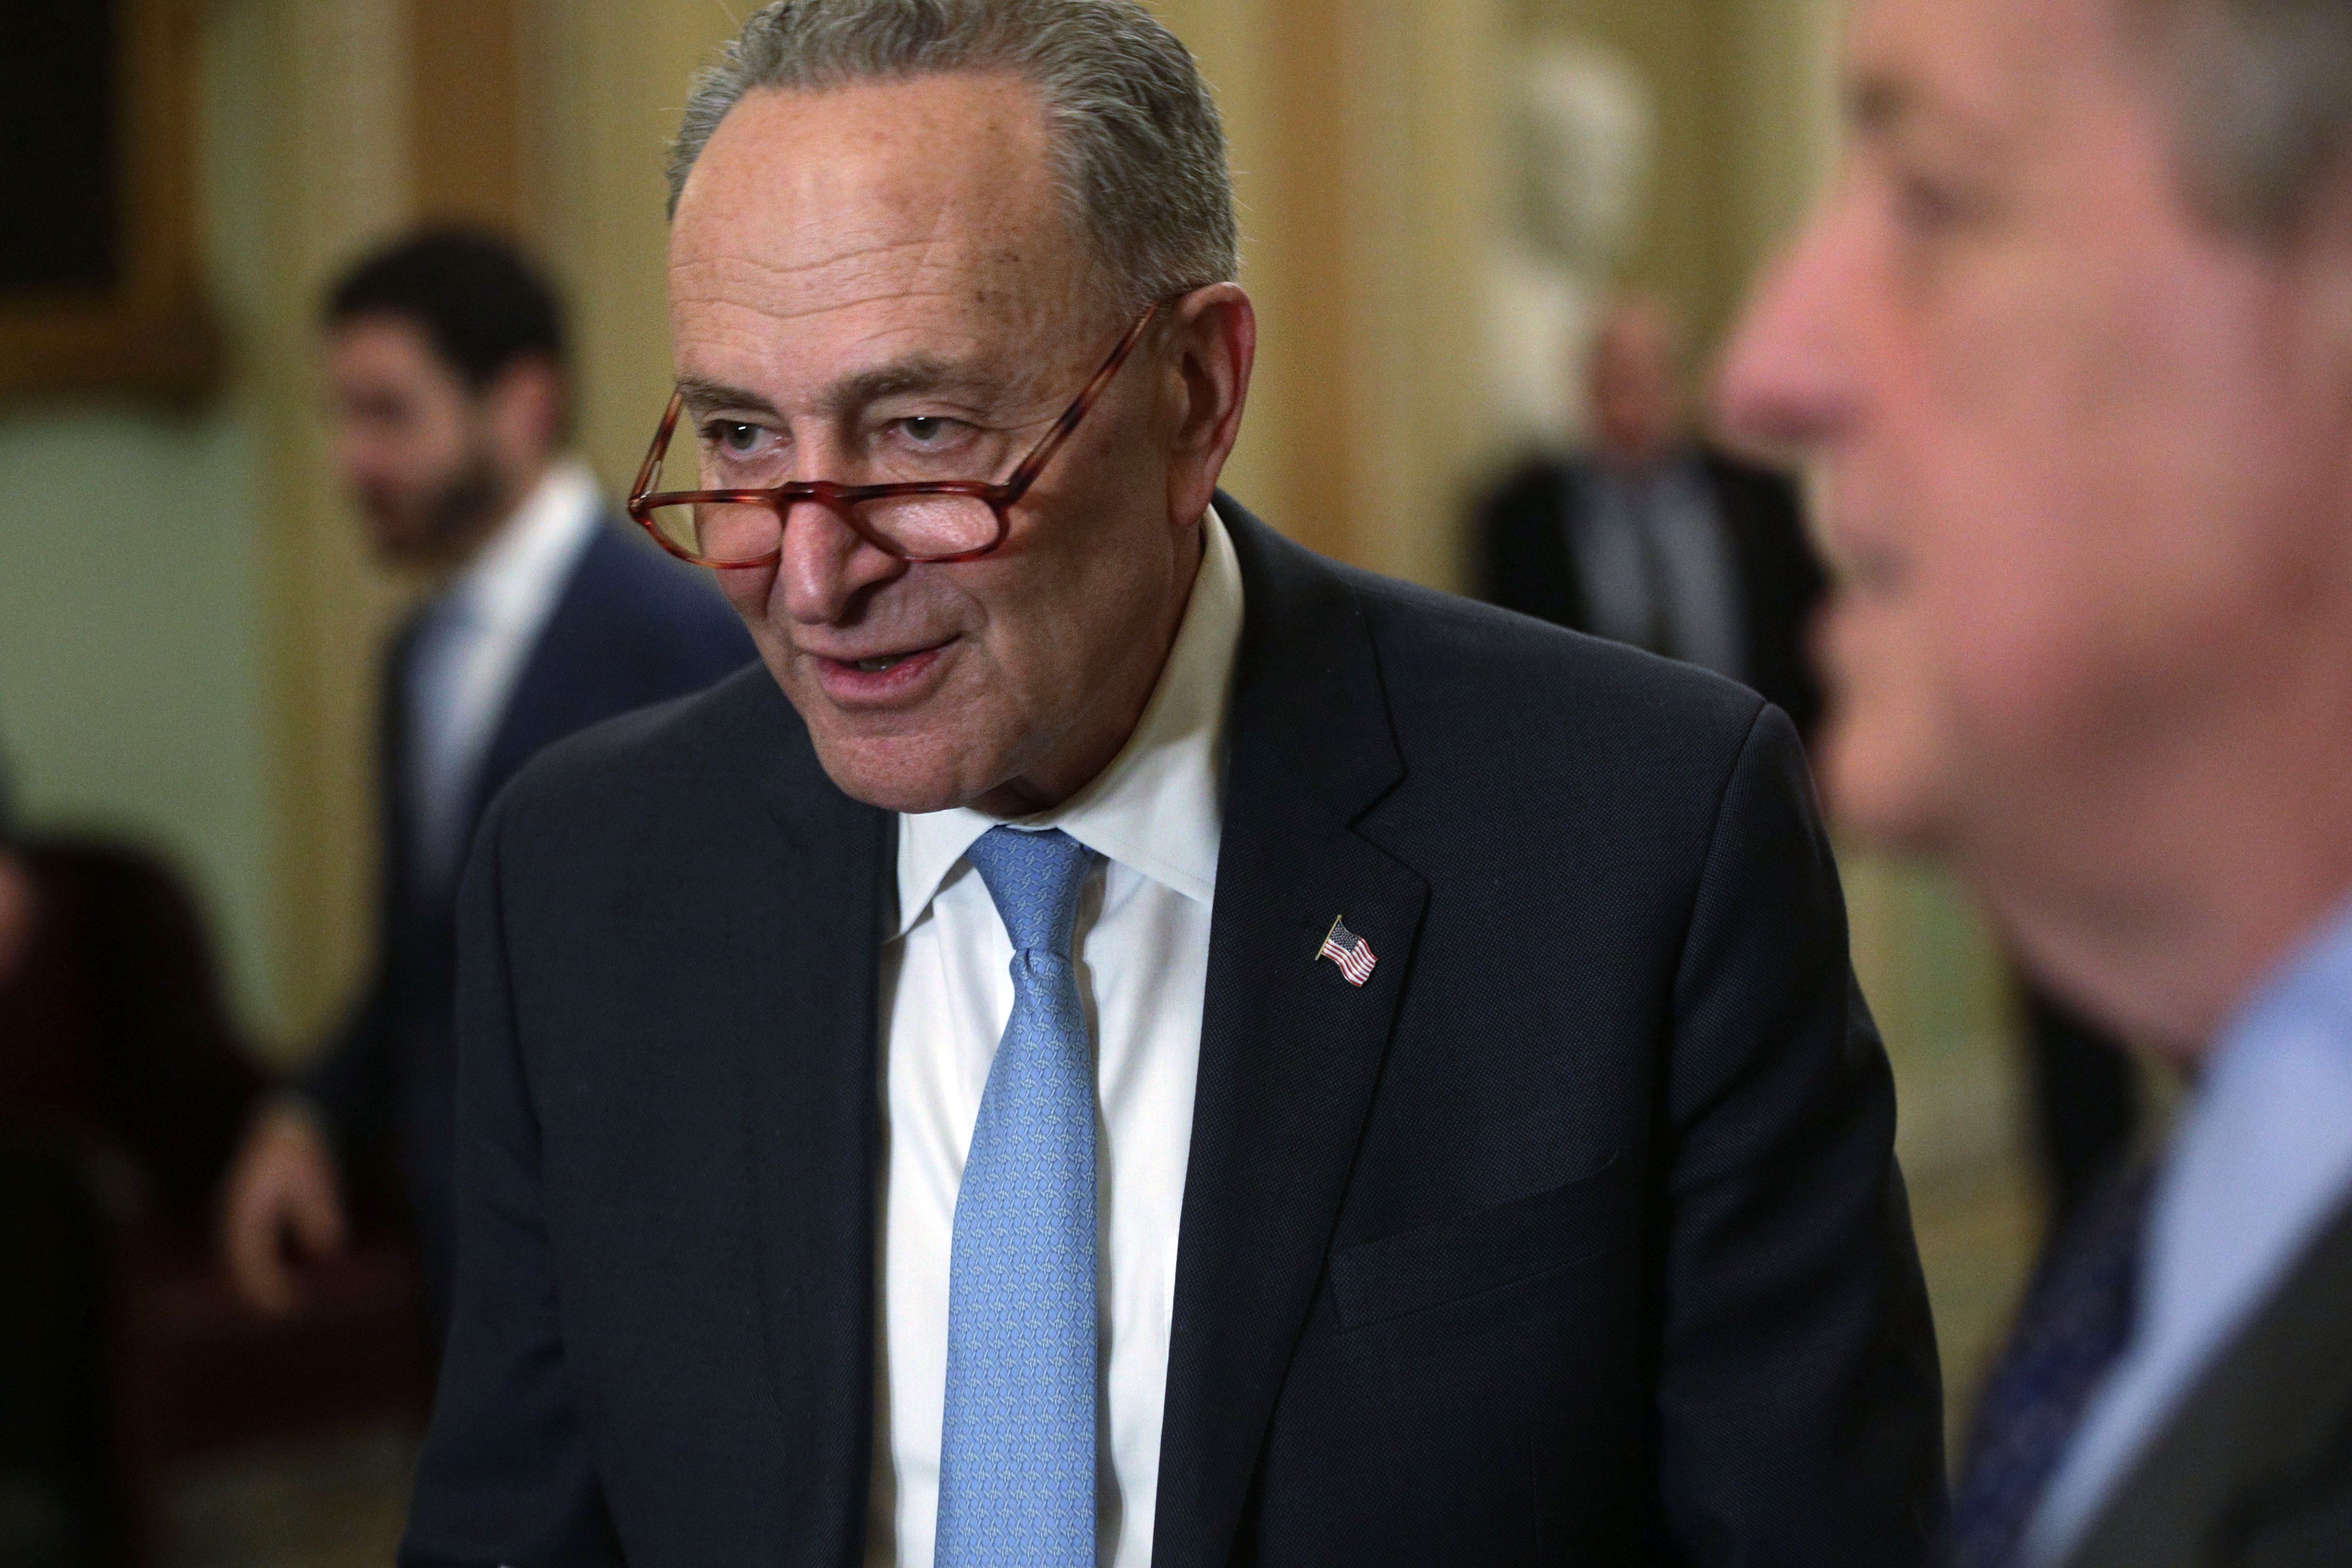 U.S. Senate Minority Leader Sen. Chuck Schumer (D-NY) approaches the podium to speak to members of the media after a weekly Senate Democratic Policy Luncheon at the U.S. Capitol Feb. 5, 2019 in Washington, D.C. (Alex Wong—Getty Images)